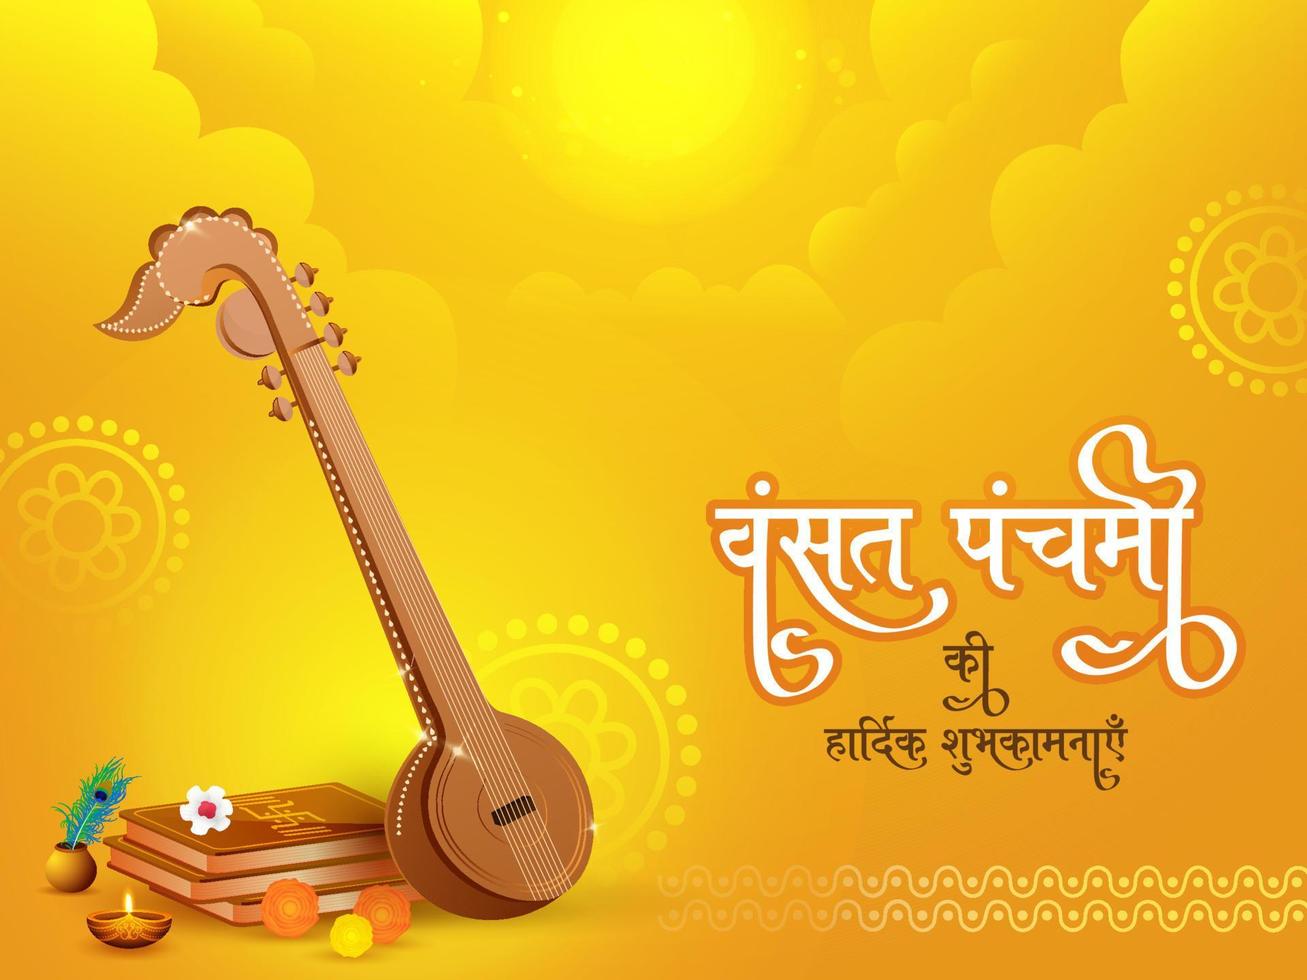 Illustration Of Veena Instrument With Holy Books, Flowers, Lit Oil Lamp On Glossy Sun Yellow Background For Happy Vasant Panchami. vector